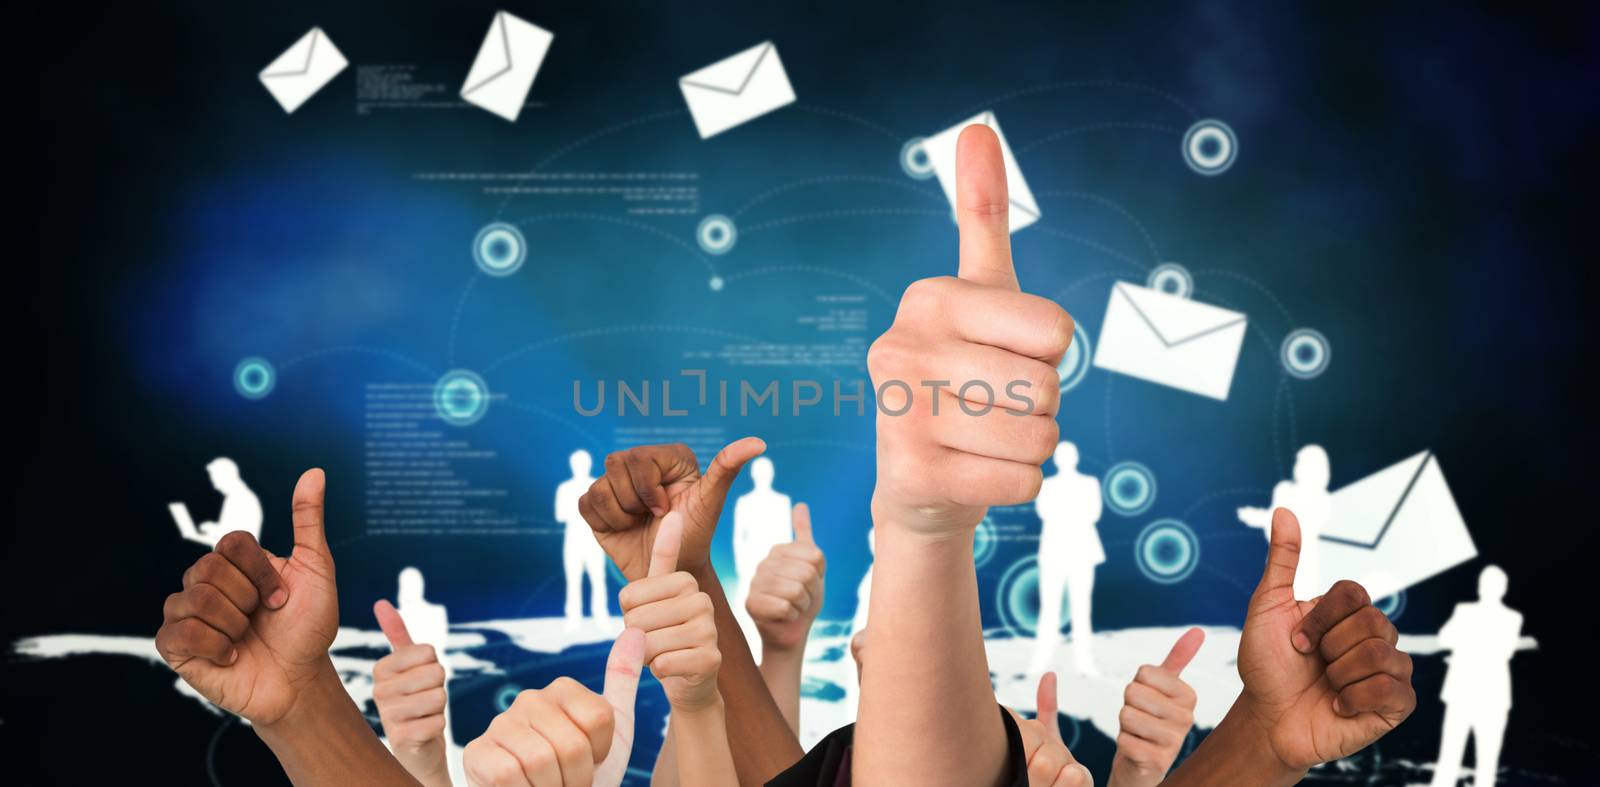 Hands showing thumbs up against global connection background